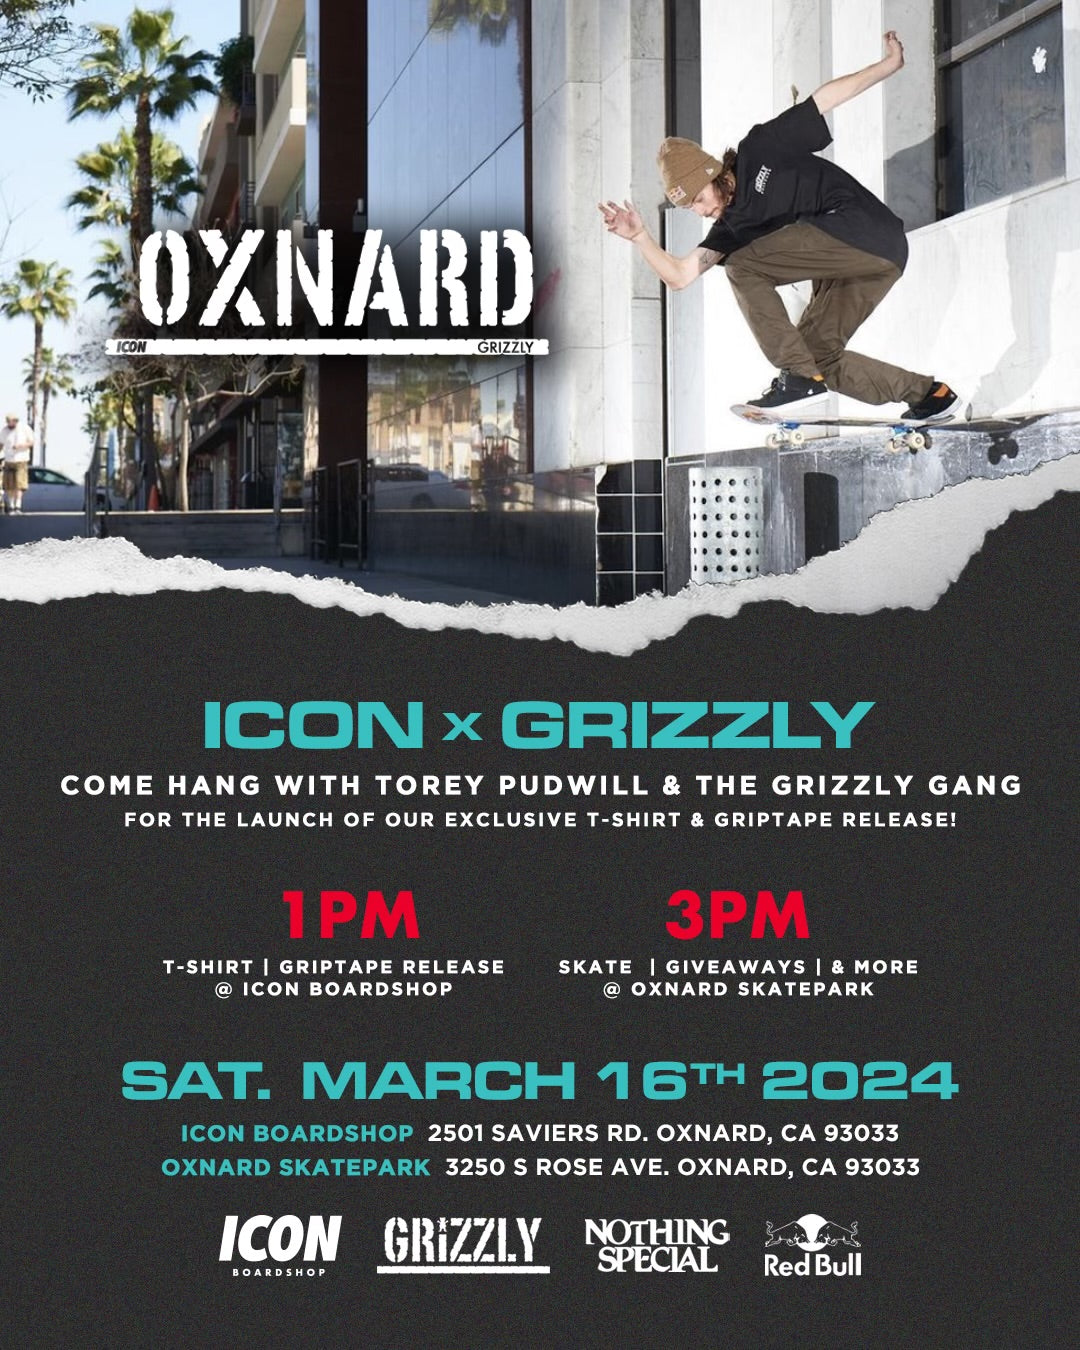 Icon Boardshop x Grizzly Griptape Event!